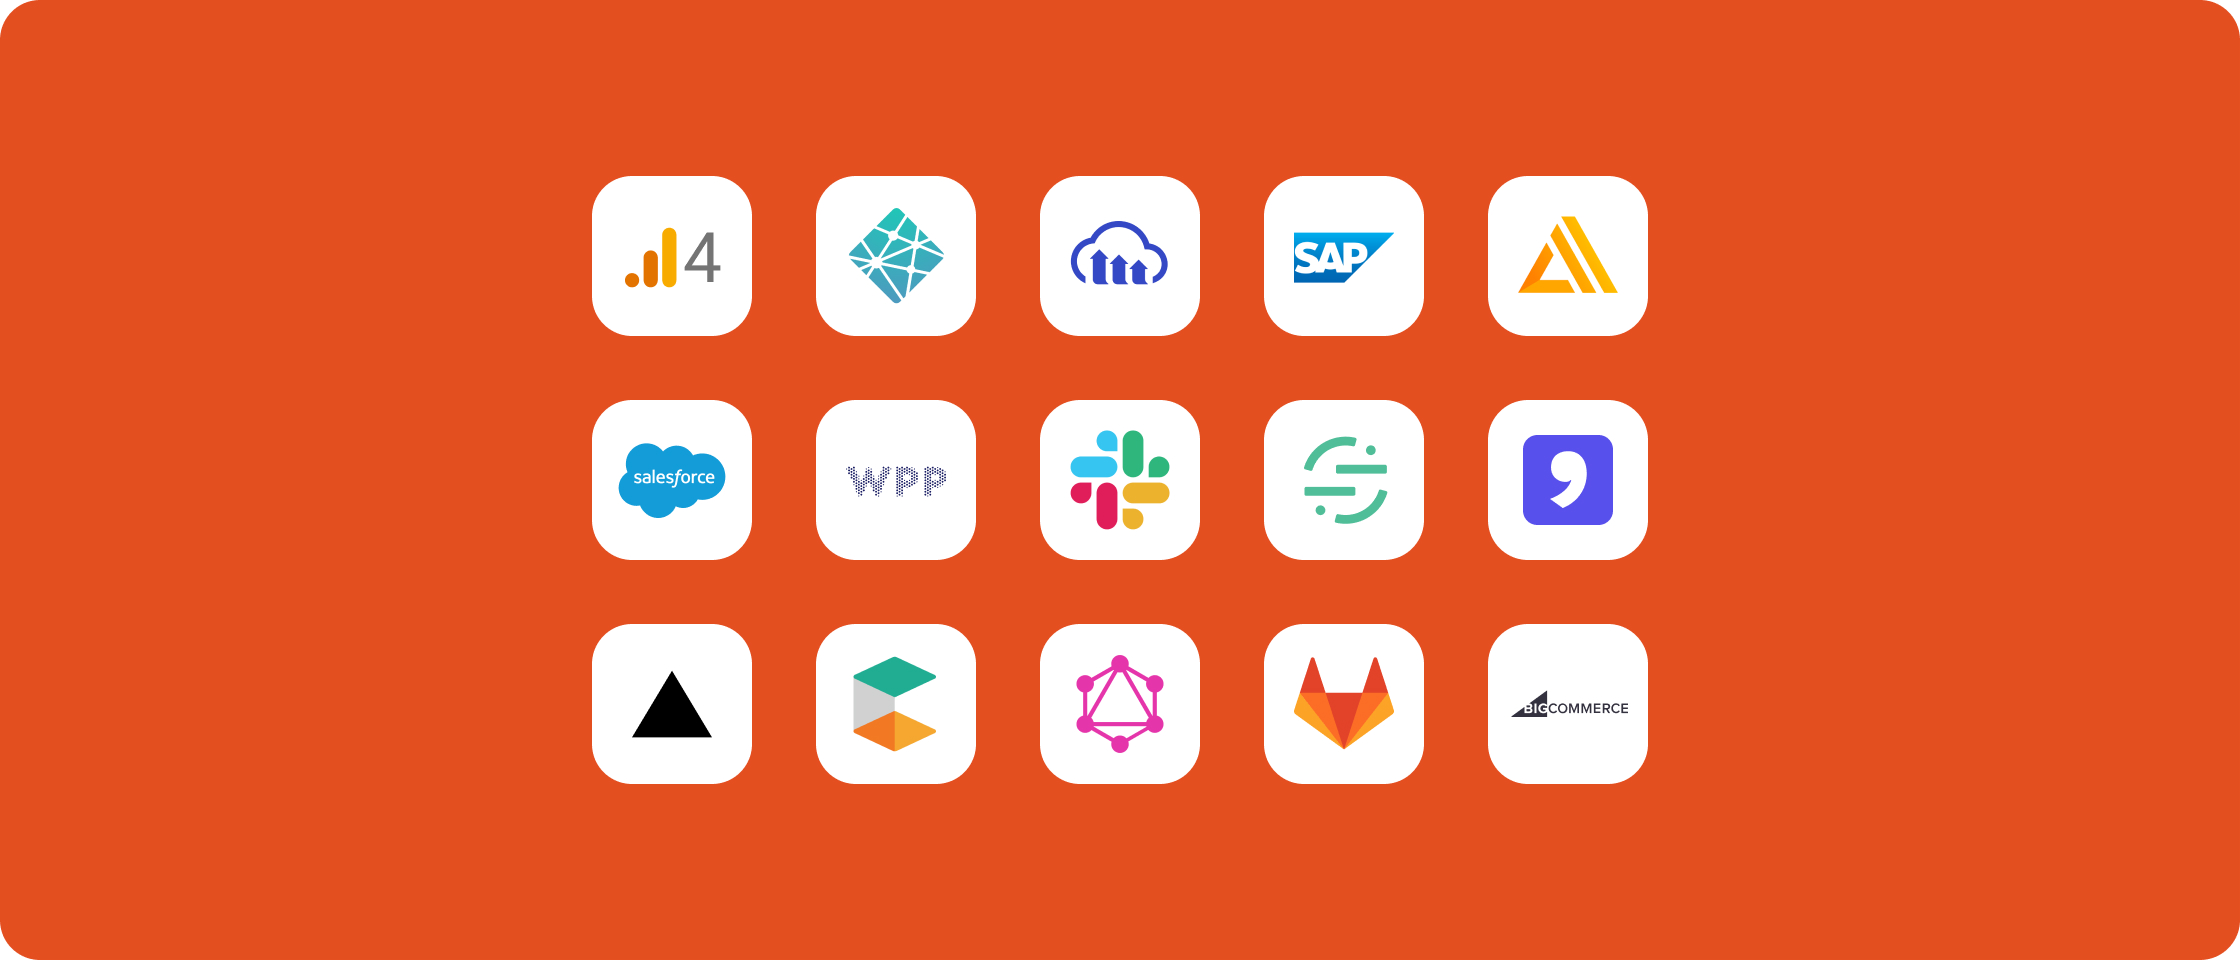 An arrangement of 15 icons representing apps from the Contentful Marketplace.